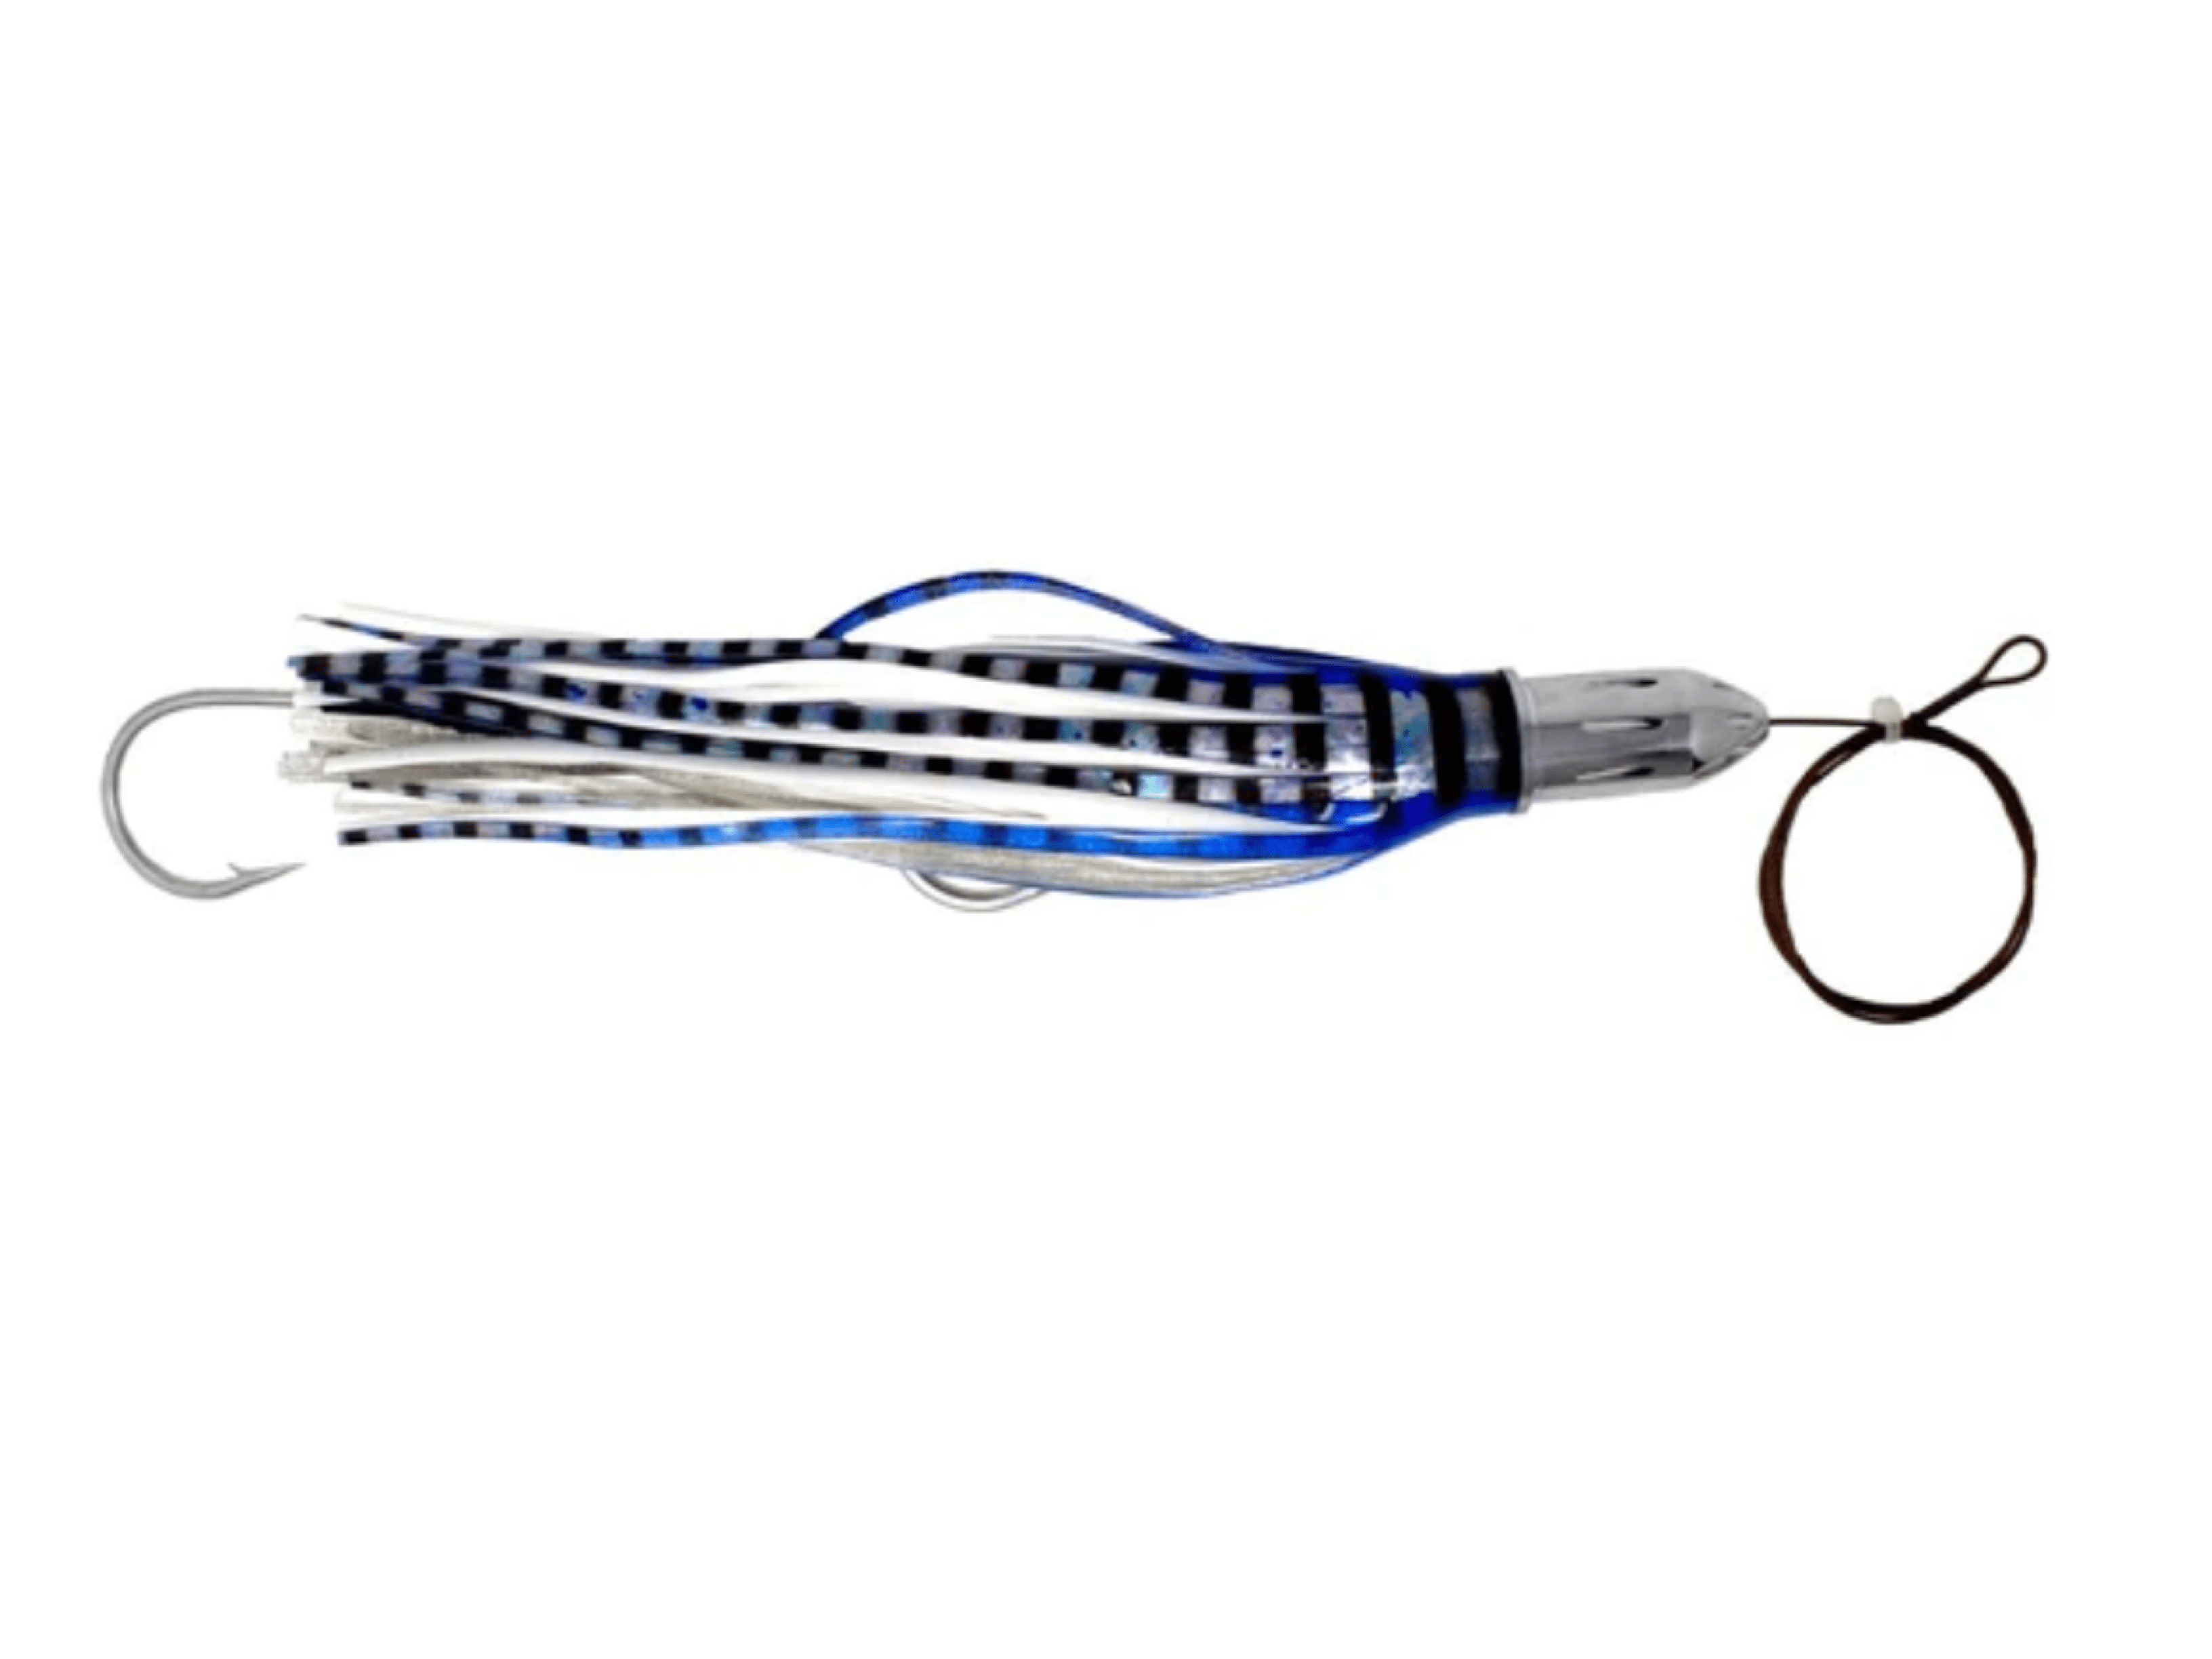  iland co. ILHH920-BL/WH Hoo-La Hood Chr Blue/White 7 1/8in 1  7/8oz : Fishing Diving Lures : Sports & Outdoors